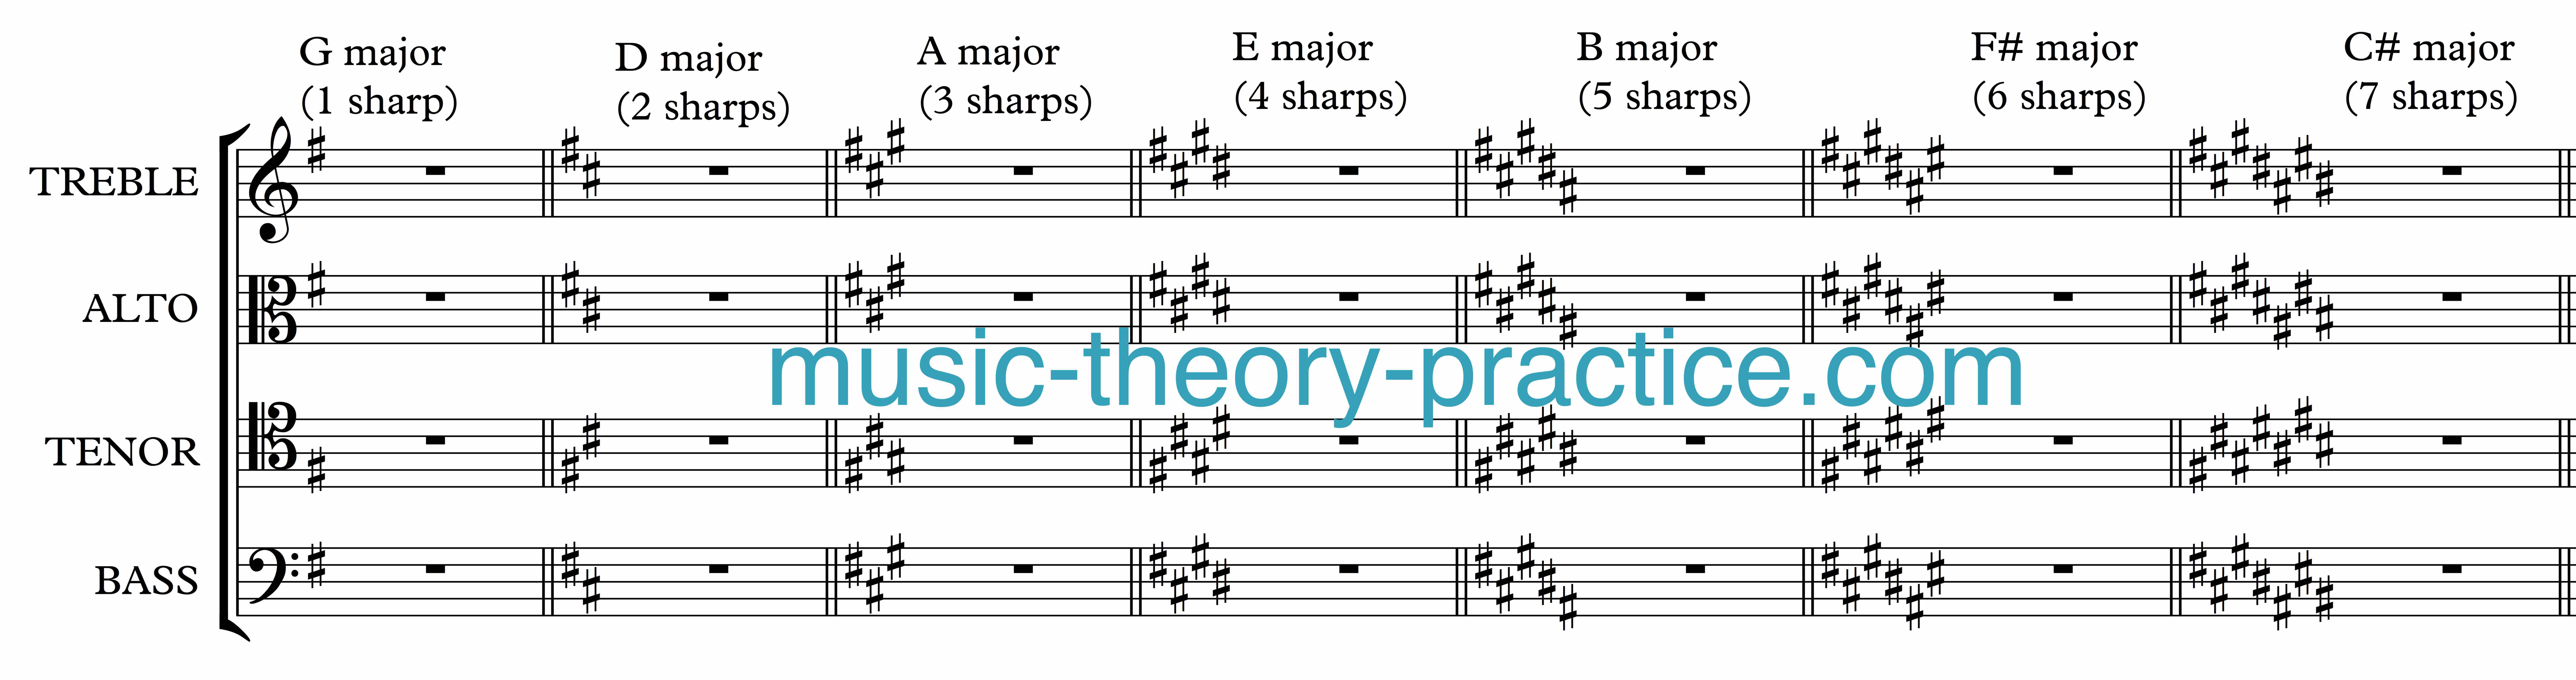 order of sharps in key signatures